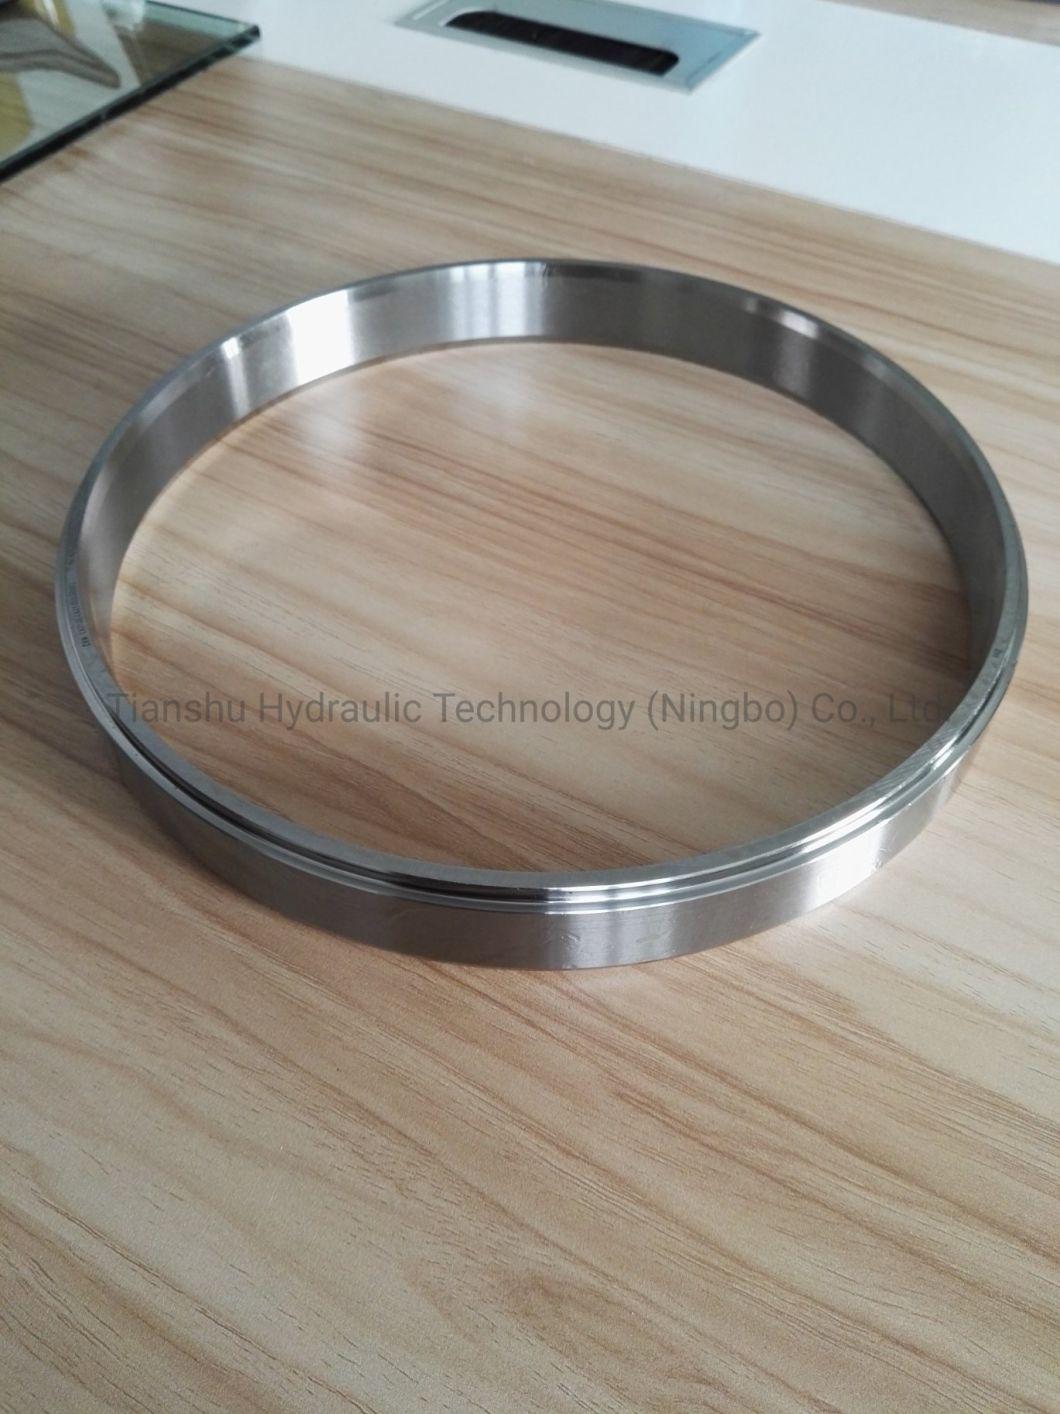 Hydraulic Spare Parts Piston Ring O Ring for Hydraulic Staffa Motor and Hagglunds Motor.